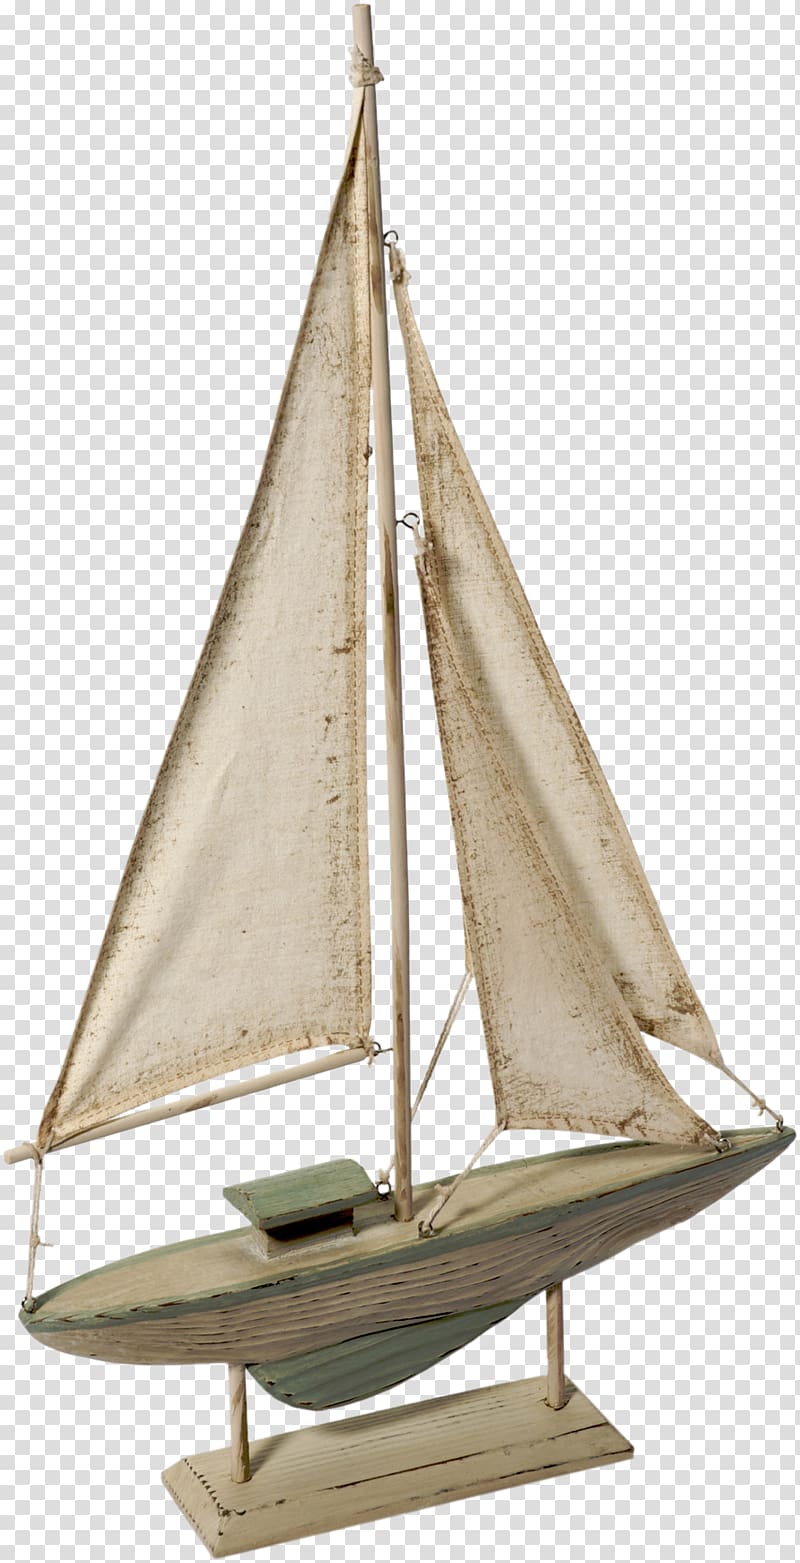 Sailing ship Boat Watercraft, Ships Creative transparent background PNG clipart